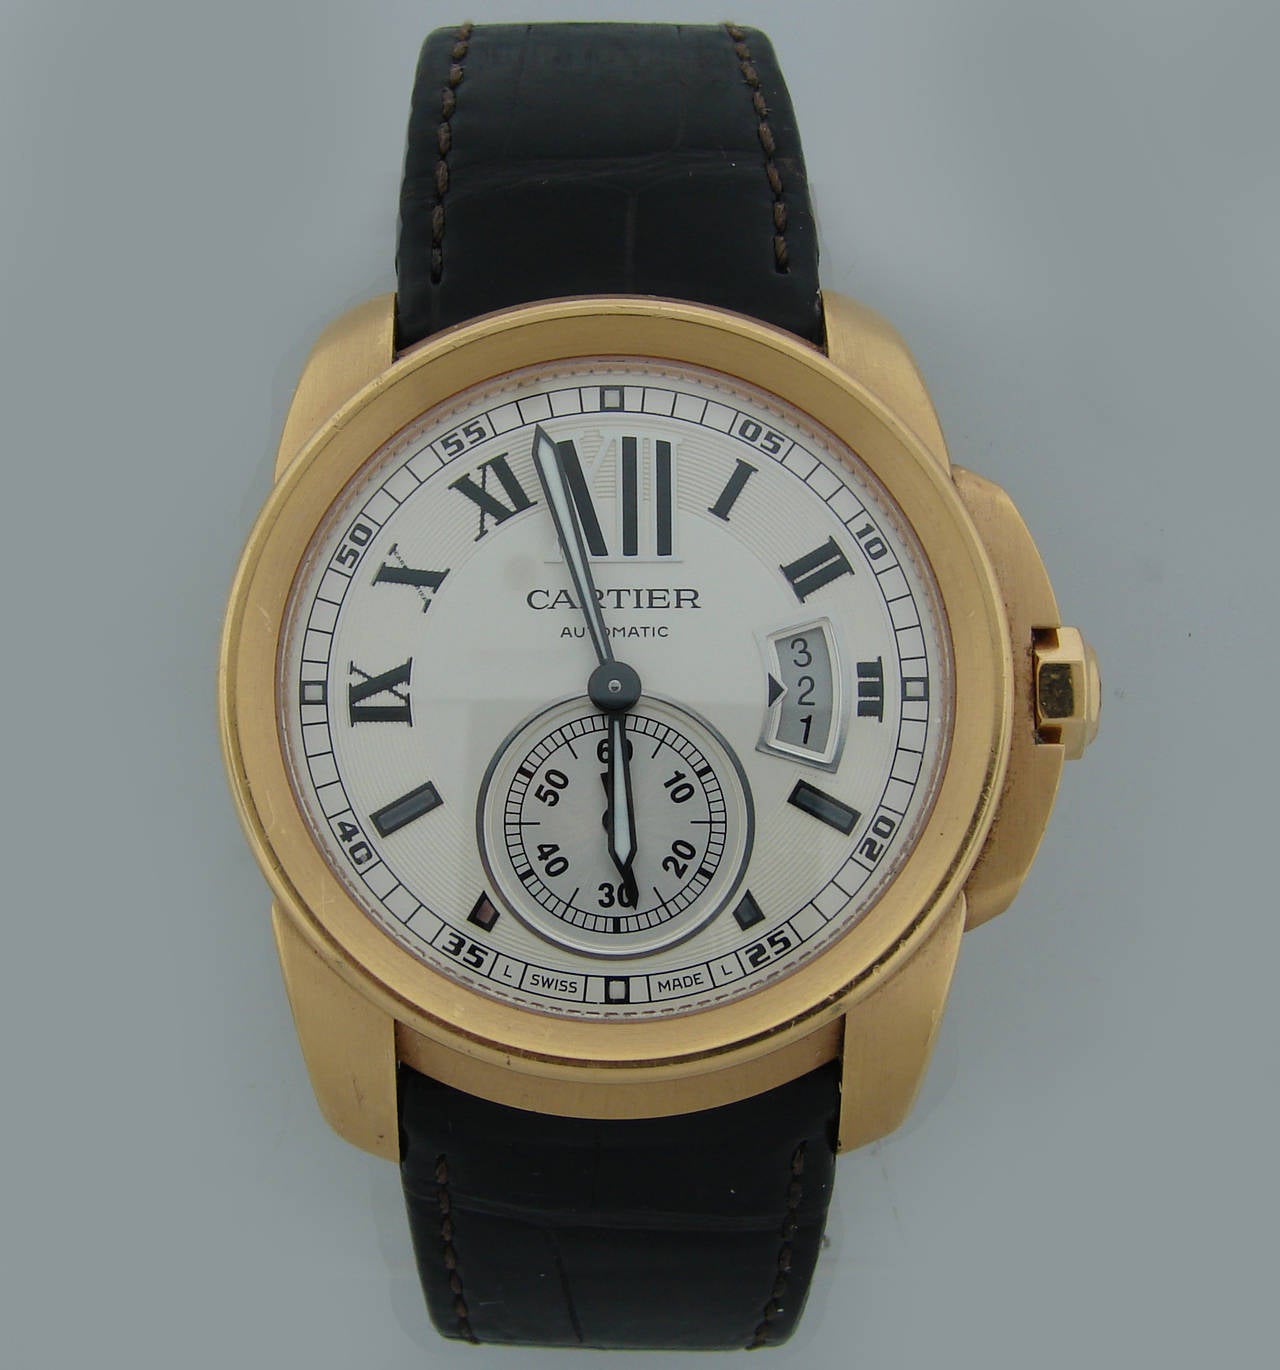 Watch-statement - Calibre de Cartier. Authentic. Comes with Cartier box.  Made of 18K rose gold. Automatic movement, Model 88177RX, Swiss made, Water resistant, 42MM, 1904-PS, 27 jewels, original Cartier 18k rose gold buckle, original Cartier